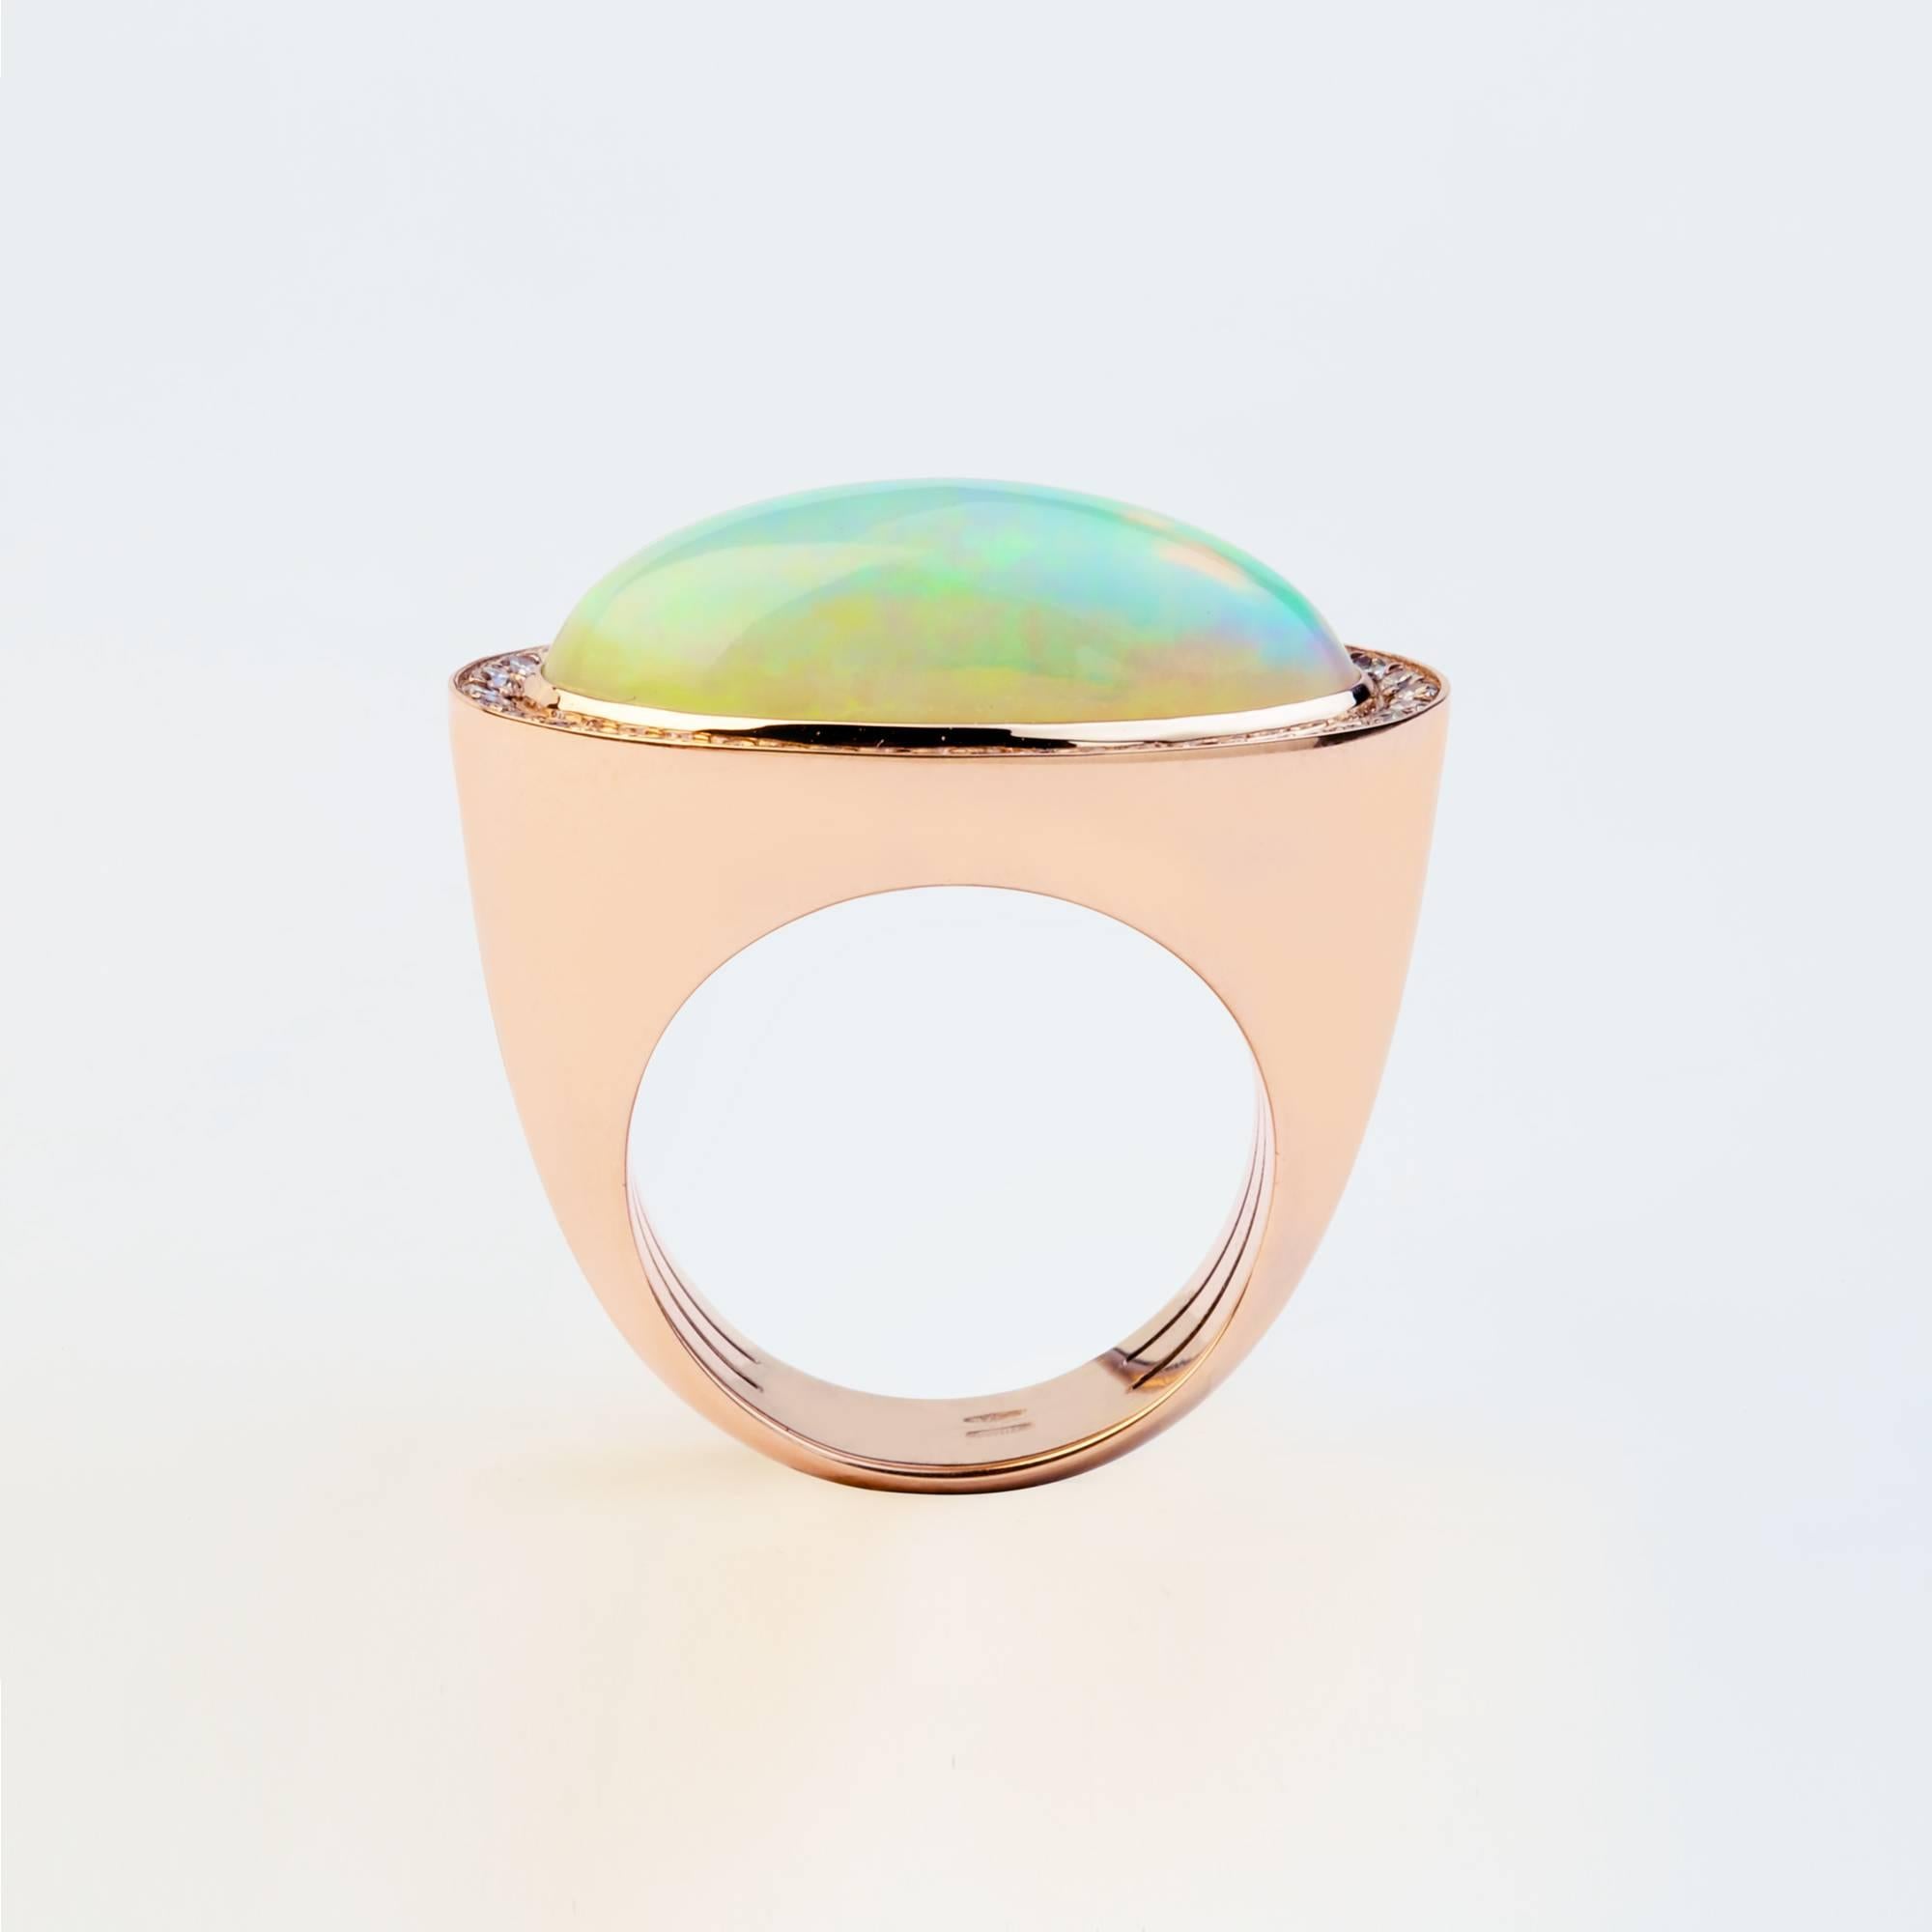 Italian Size 14 - US size 6 3/4 - FR size 54
On request you can view variants of this ring with other Flash Opal stones.